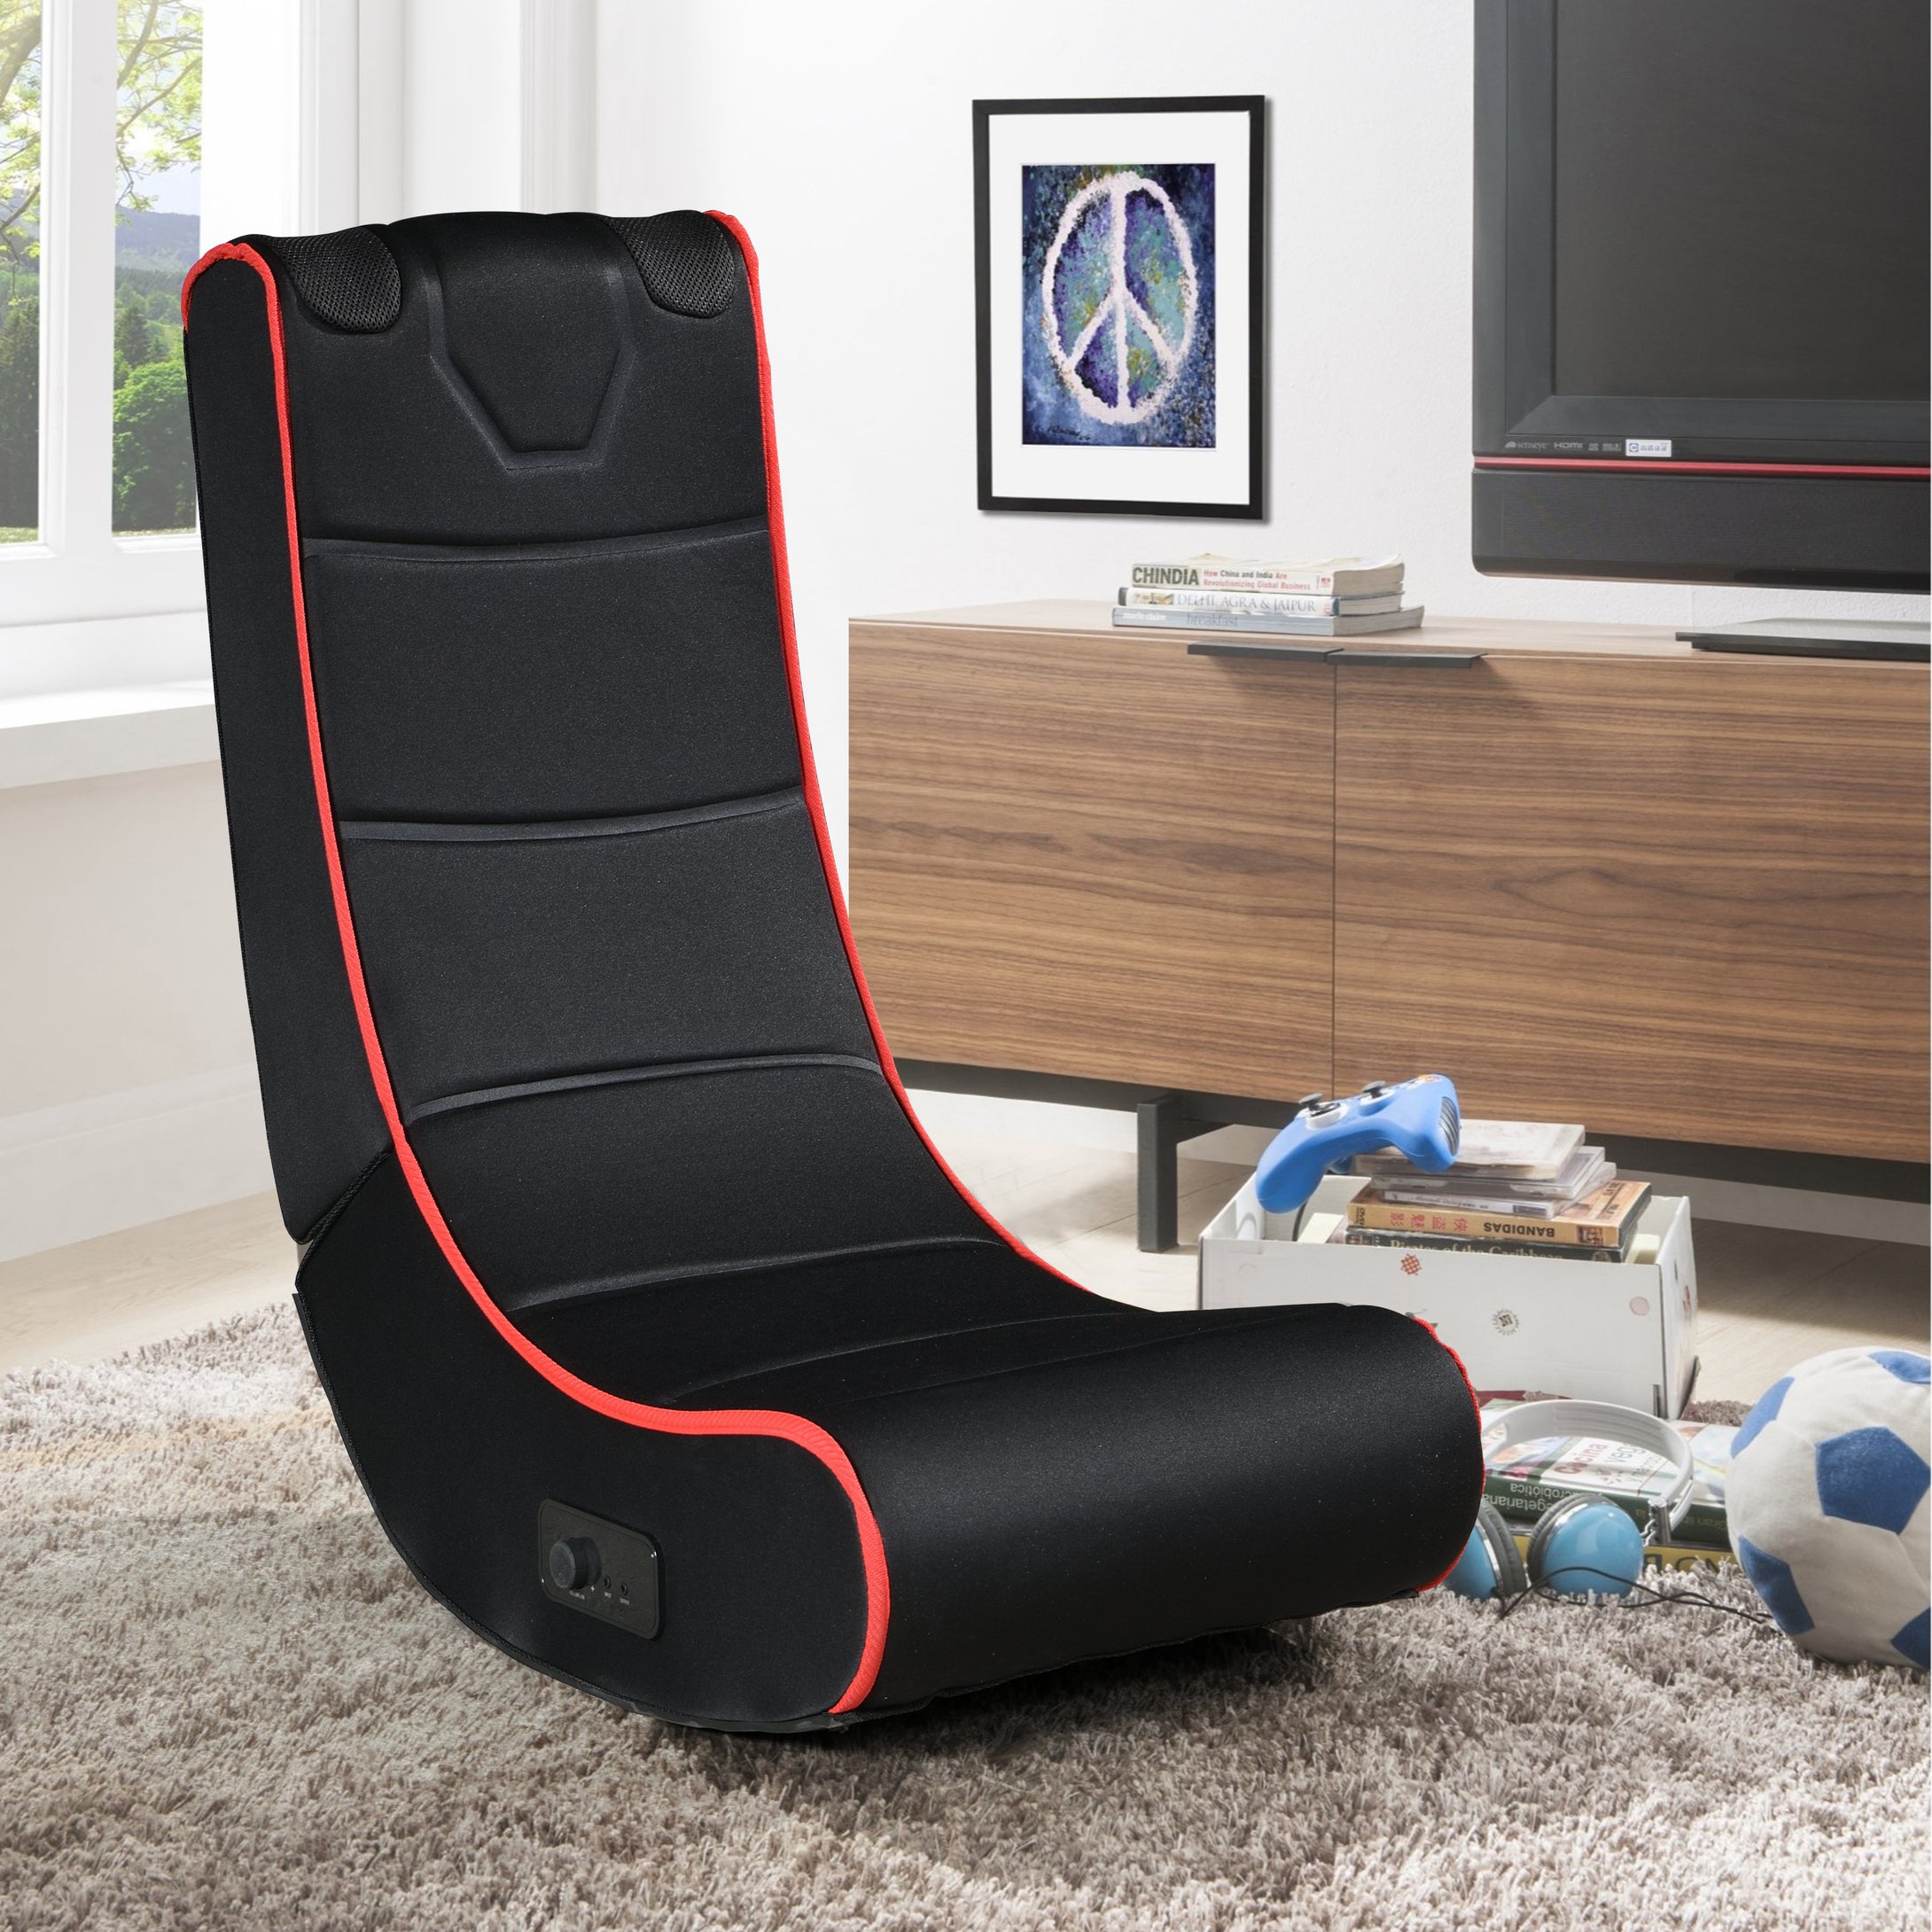 Foldable Gaming Chair with Built-in Bluetooth Music Speakers